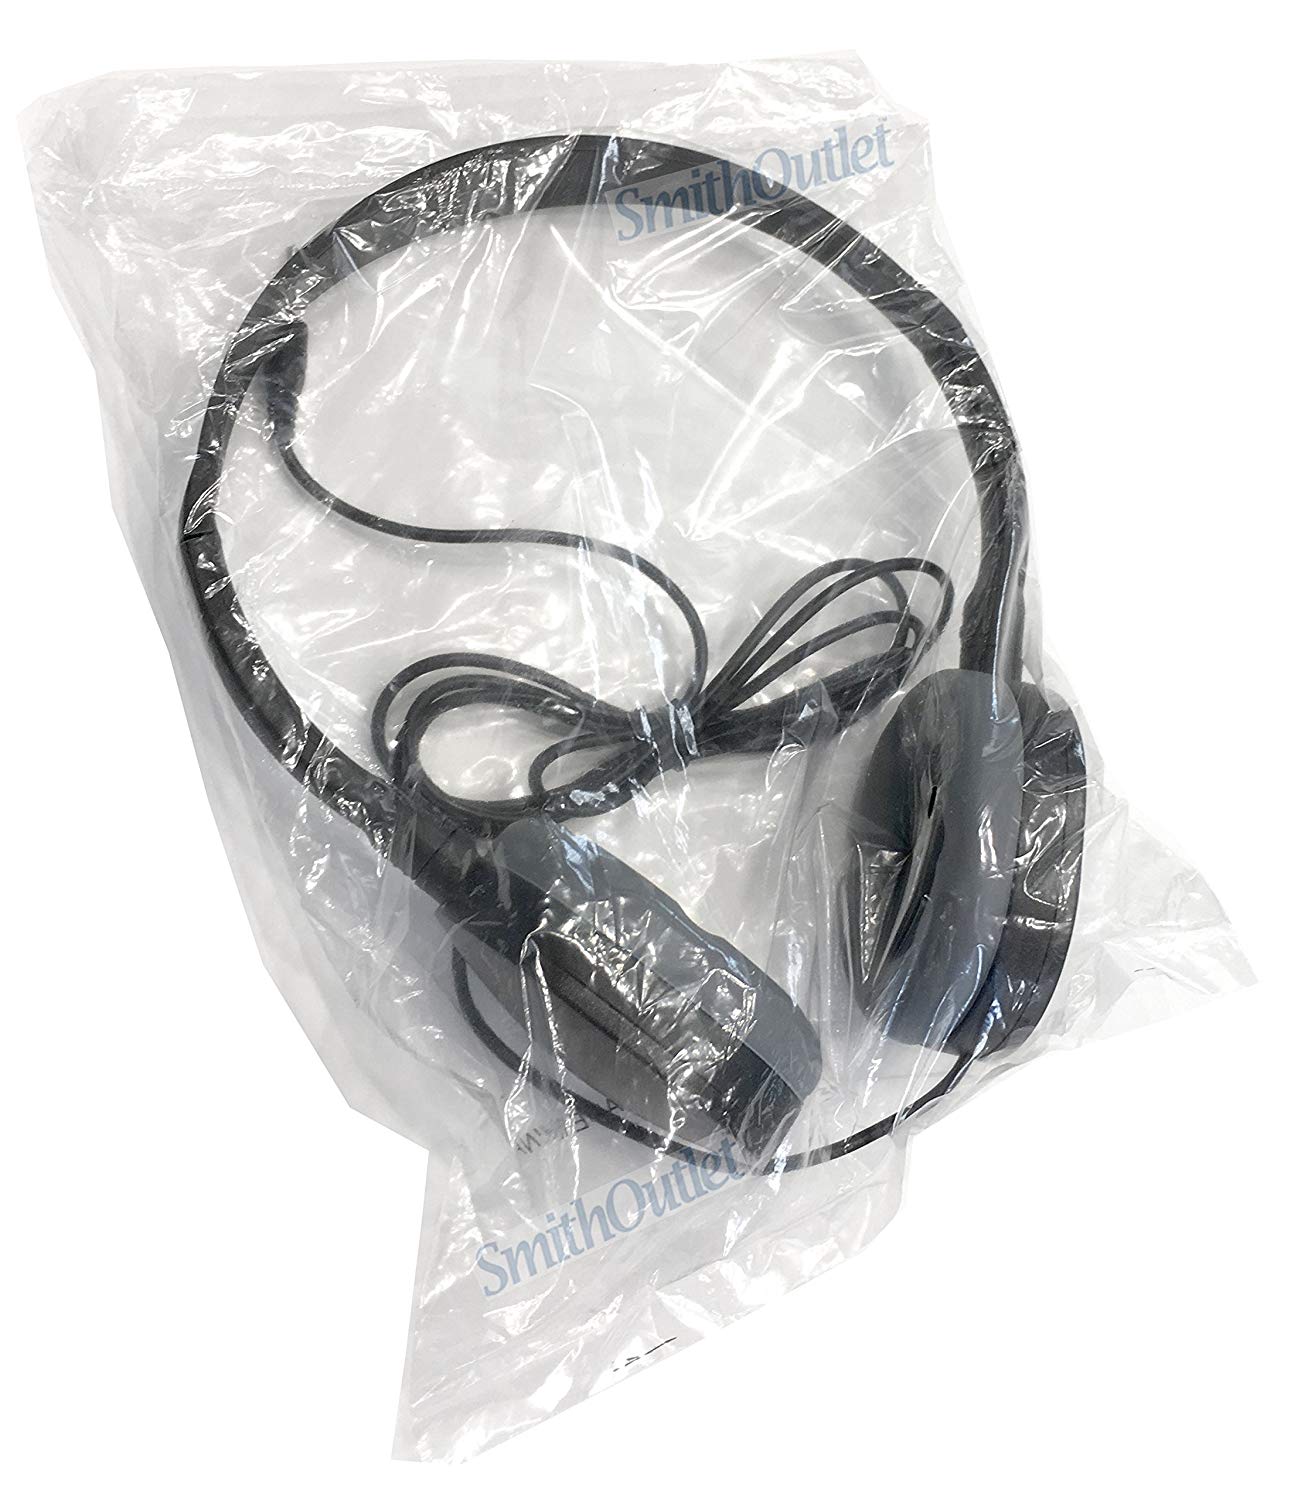 SmithOutlet 200-Pack Stereo Headphones Packaged for Efficient Distribution